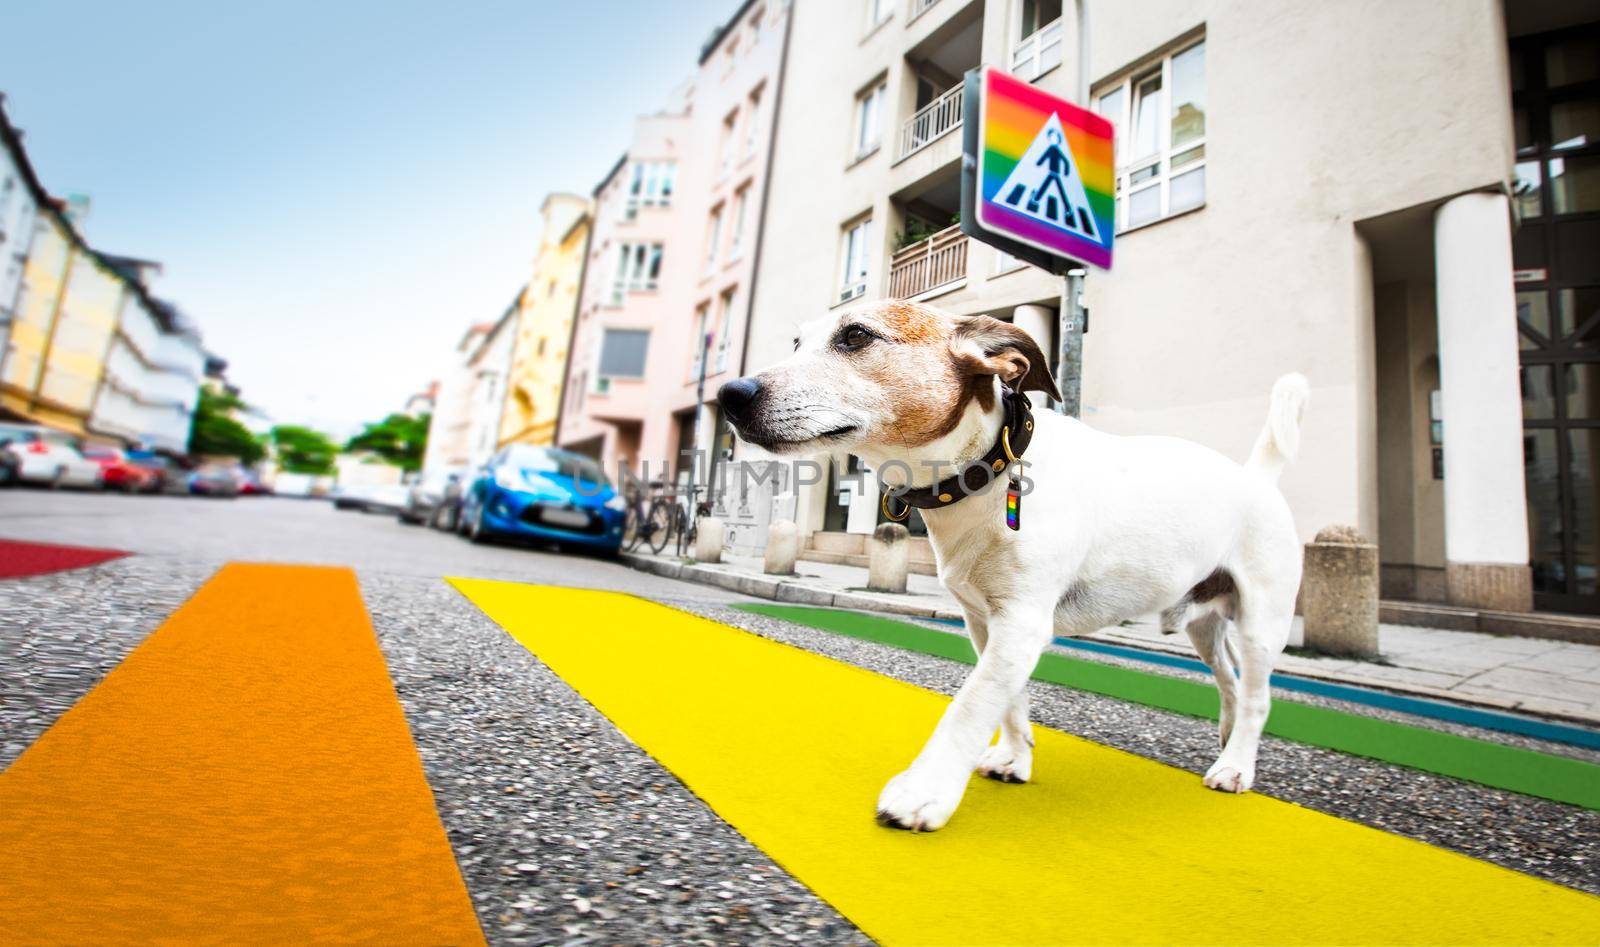 jack russell terrier dog in gay pride   waiting for owner to cross the rainbow flag street  crossing walk with leash, outdors